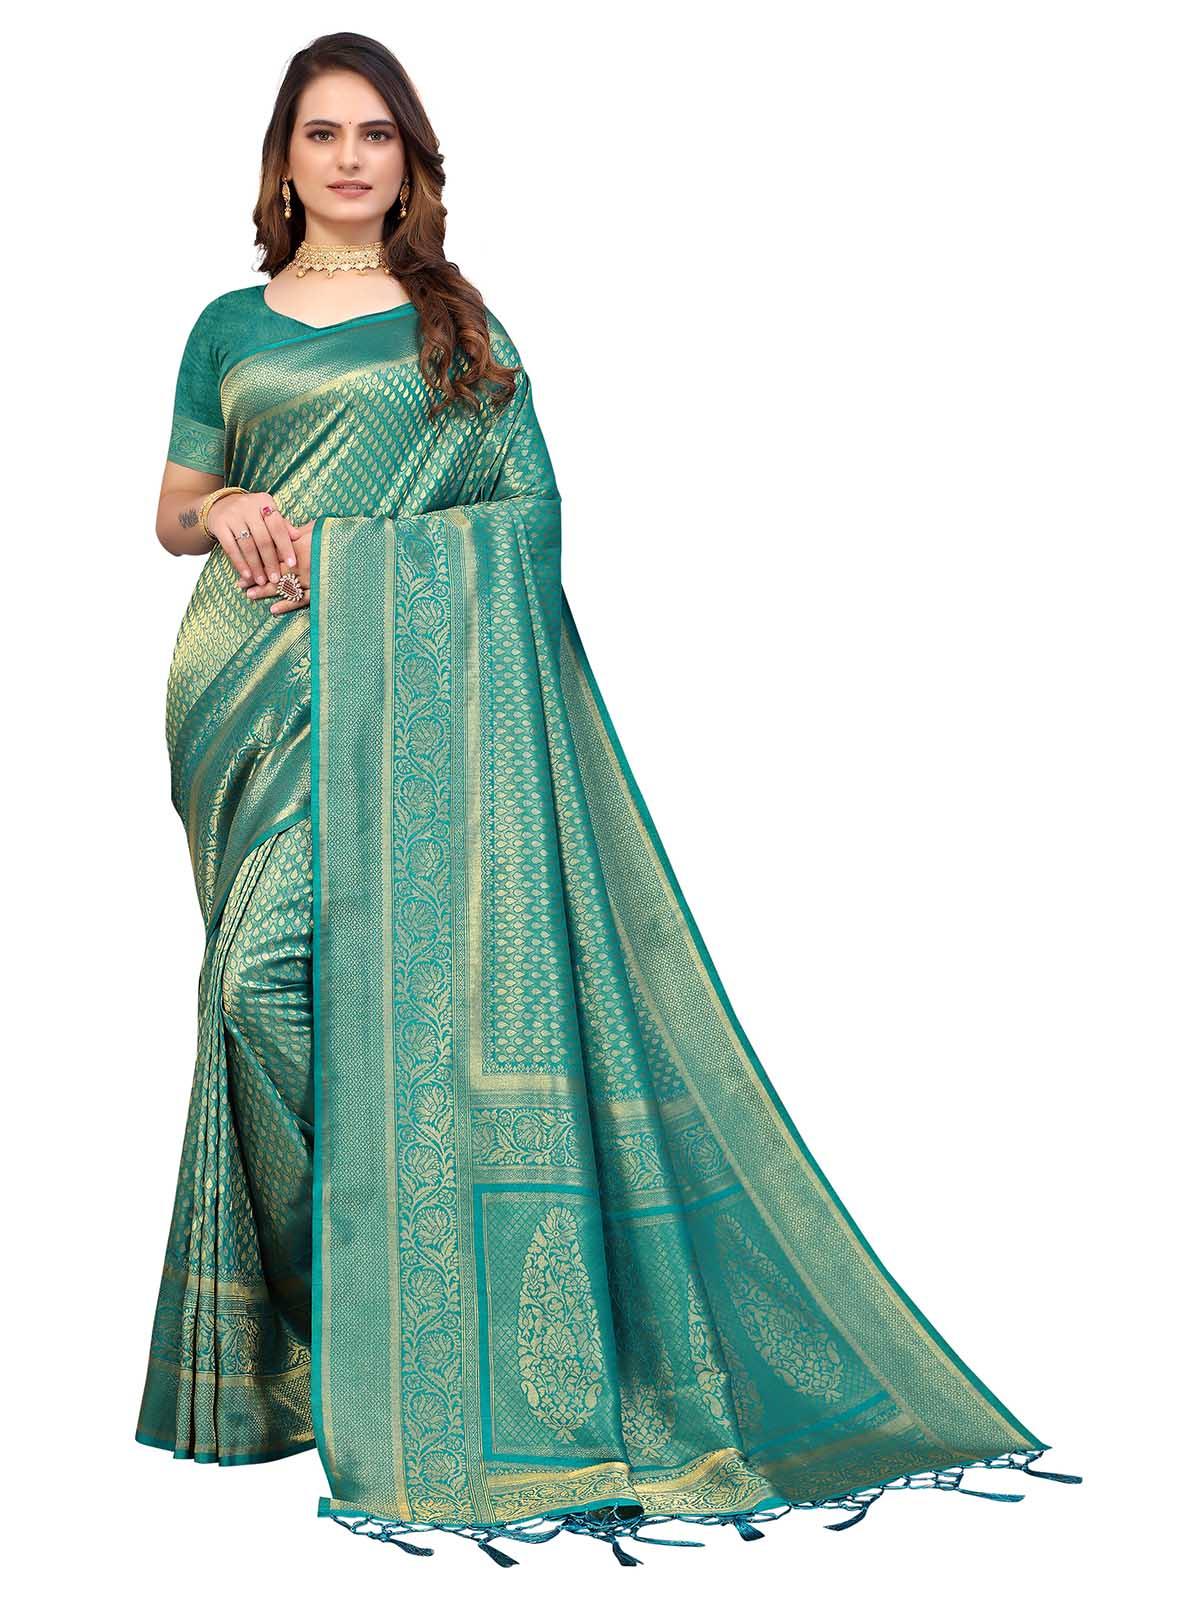 Women's Teal Silk Blend Woven Saree With Blouse - Odette